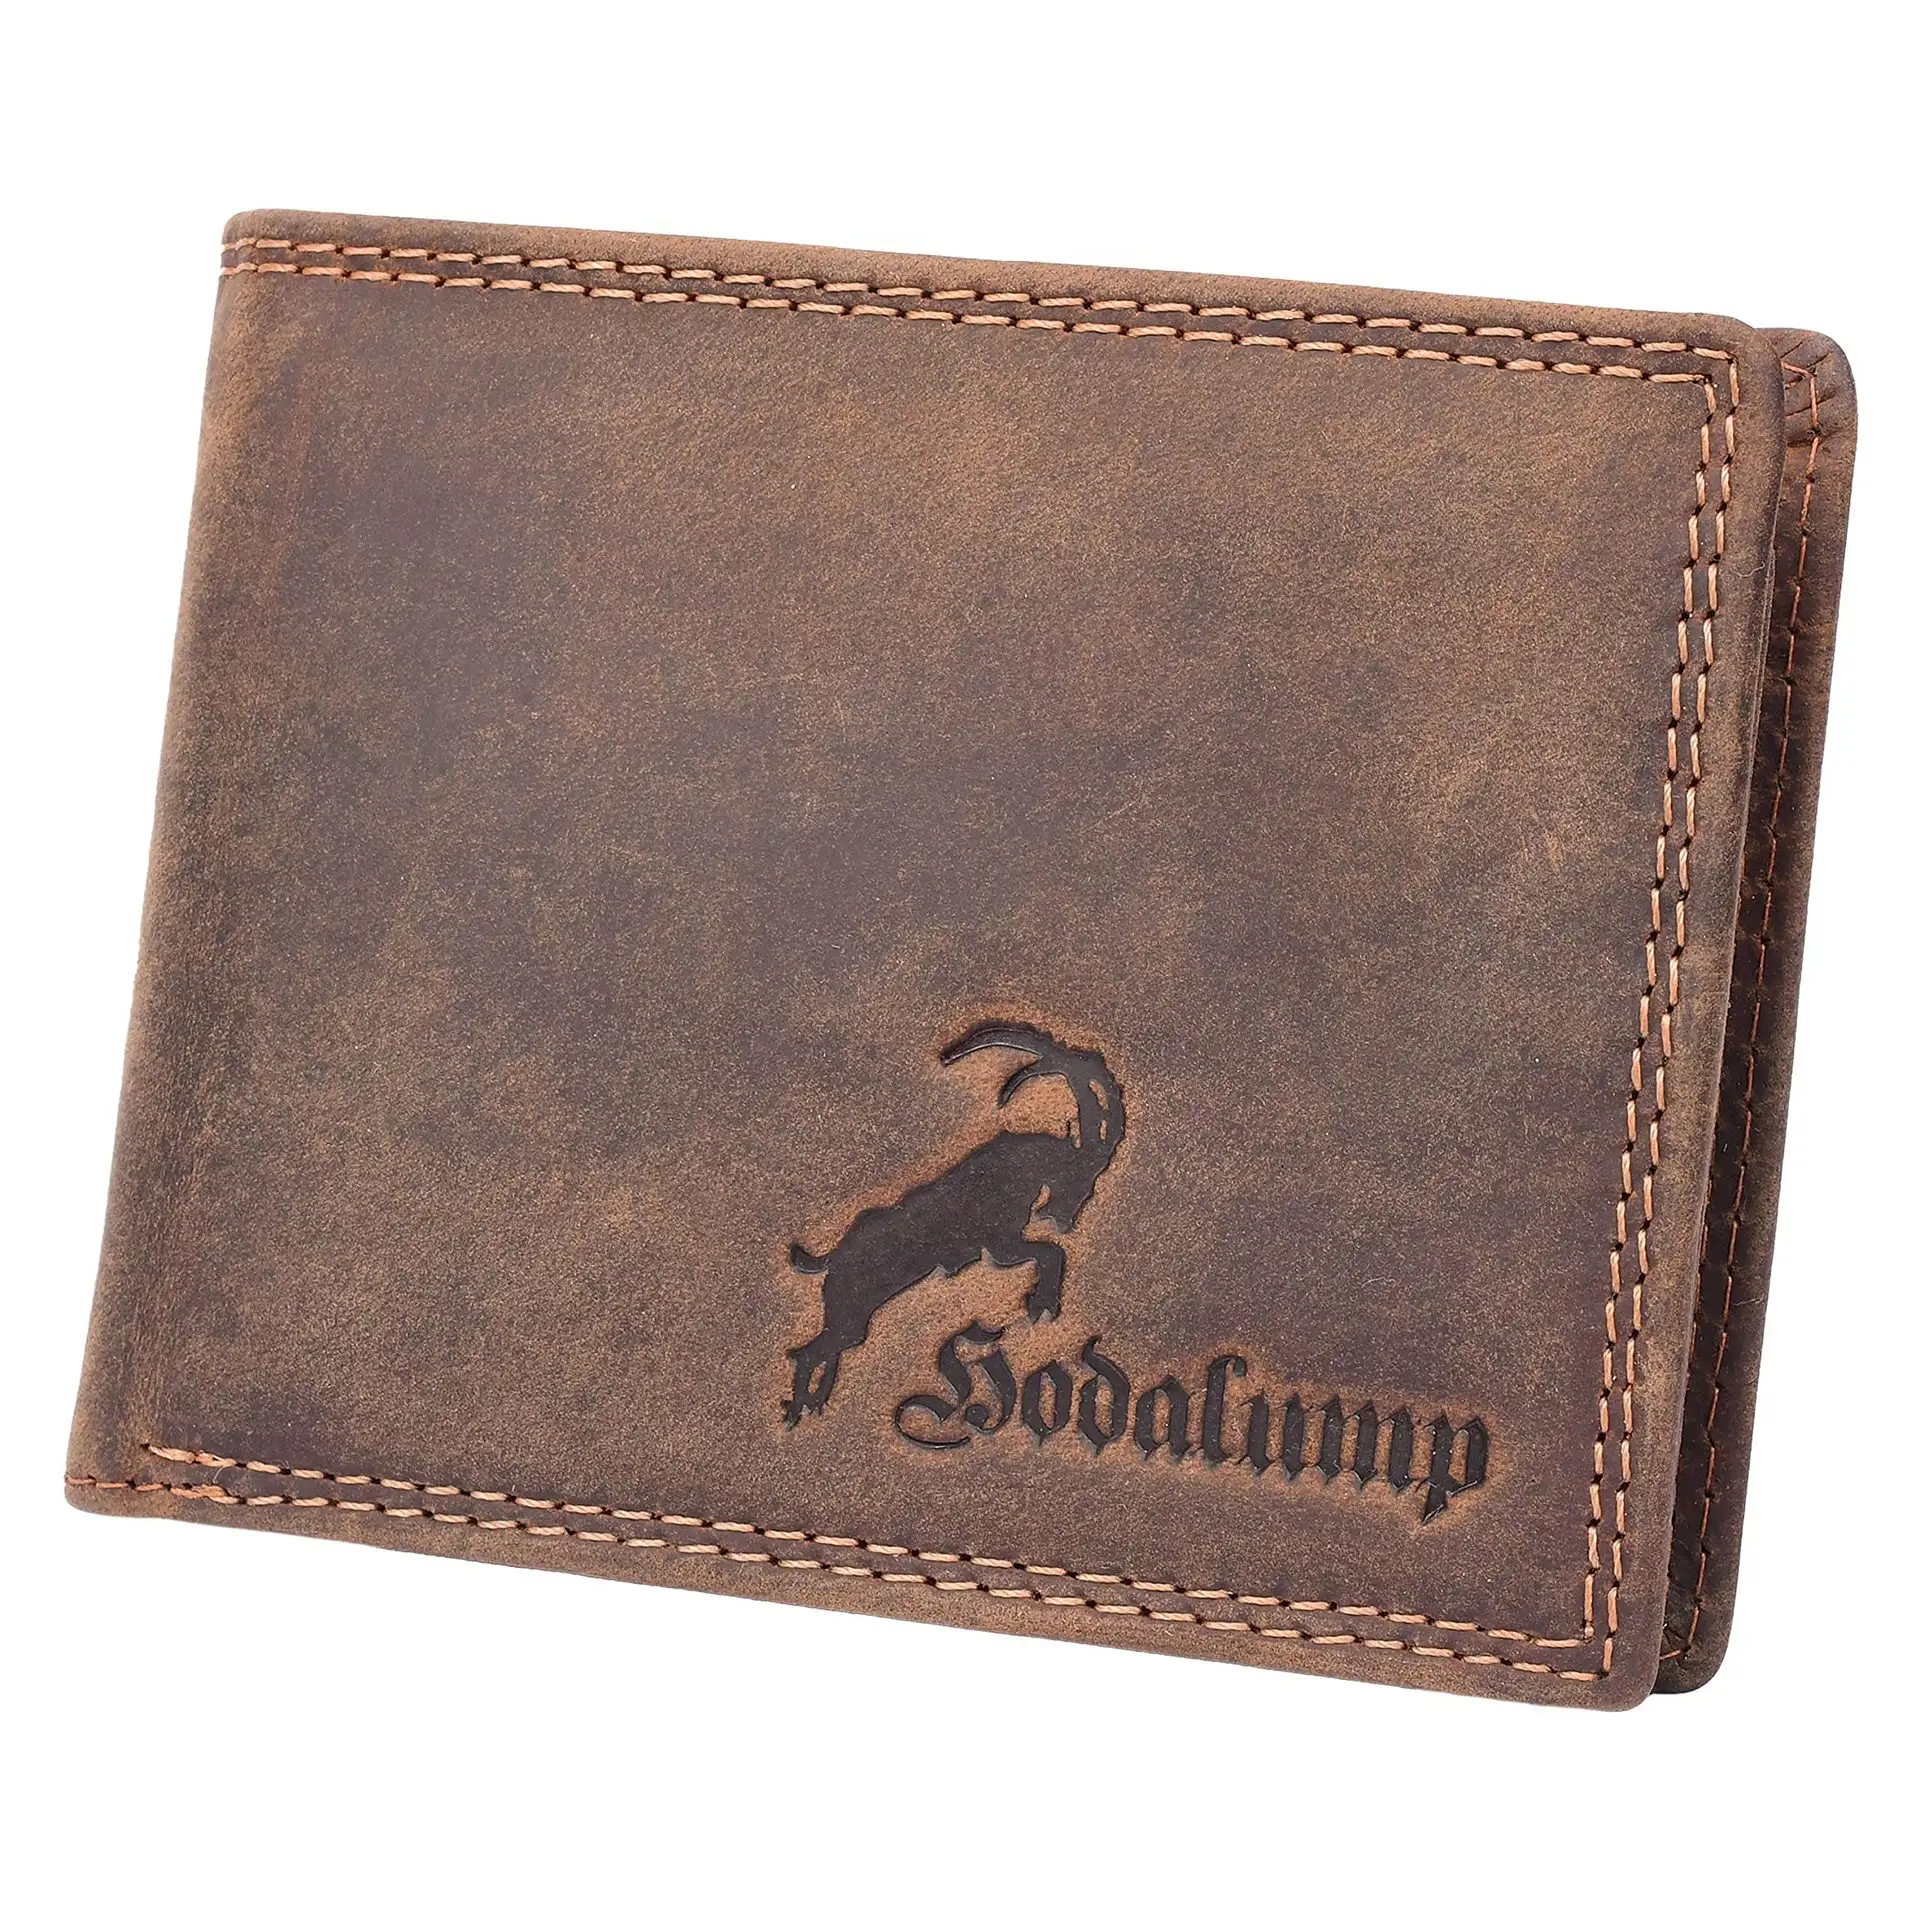 First layer leather purse men's wholesale buckle coin bag money clip two fold simple open zero purse